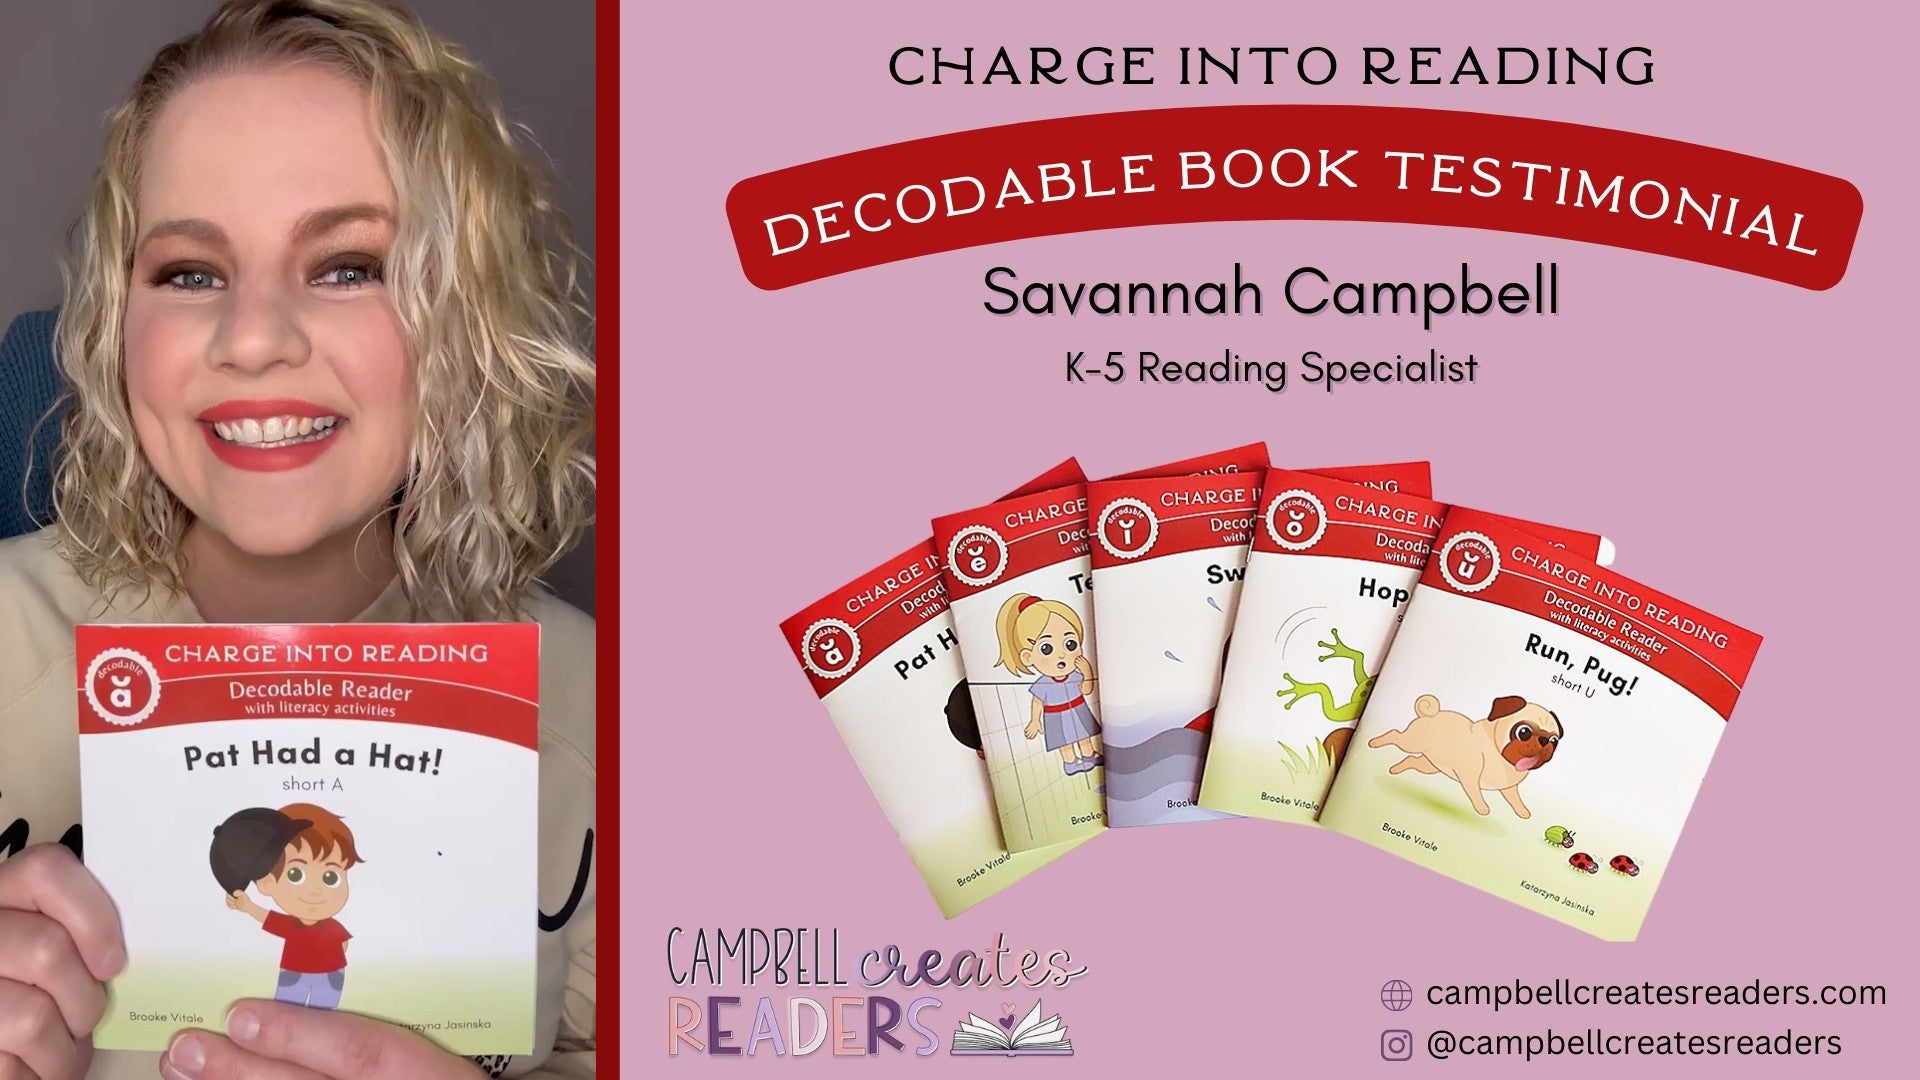 Load video: K-5 Reading Specialst Savannah Campbell reviews the Charge into Reading Decodable Reading System.